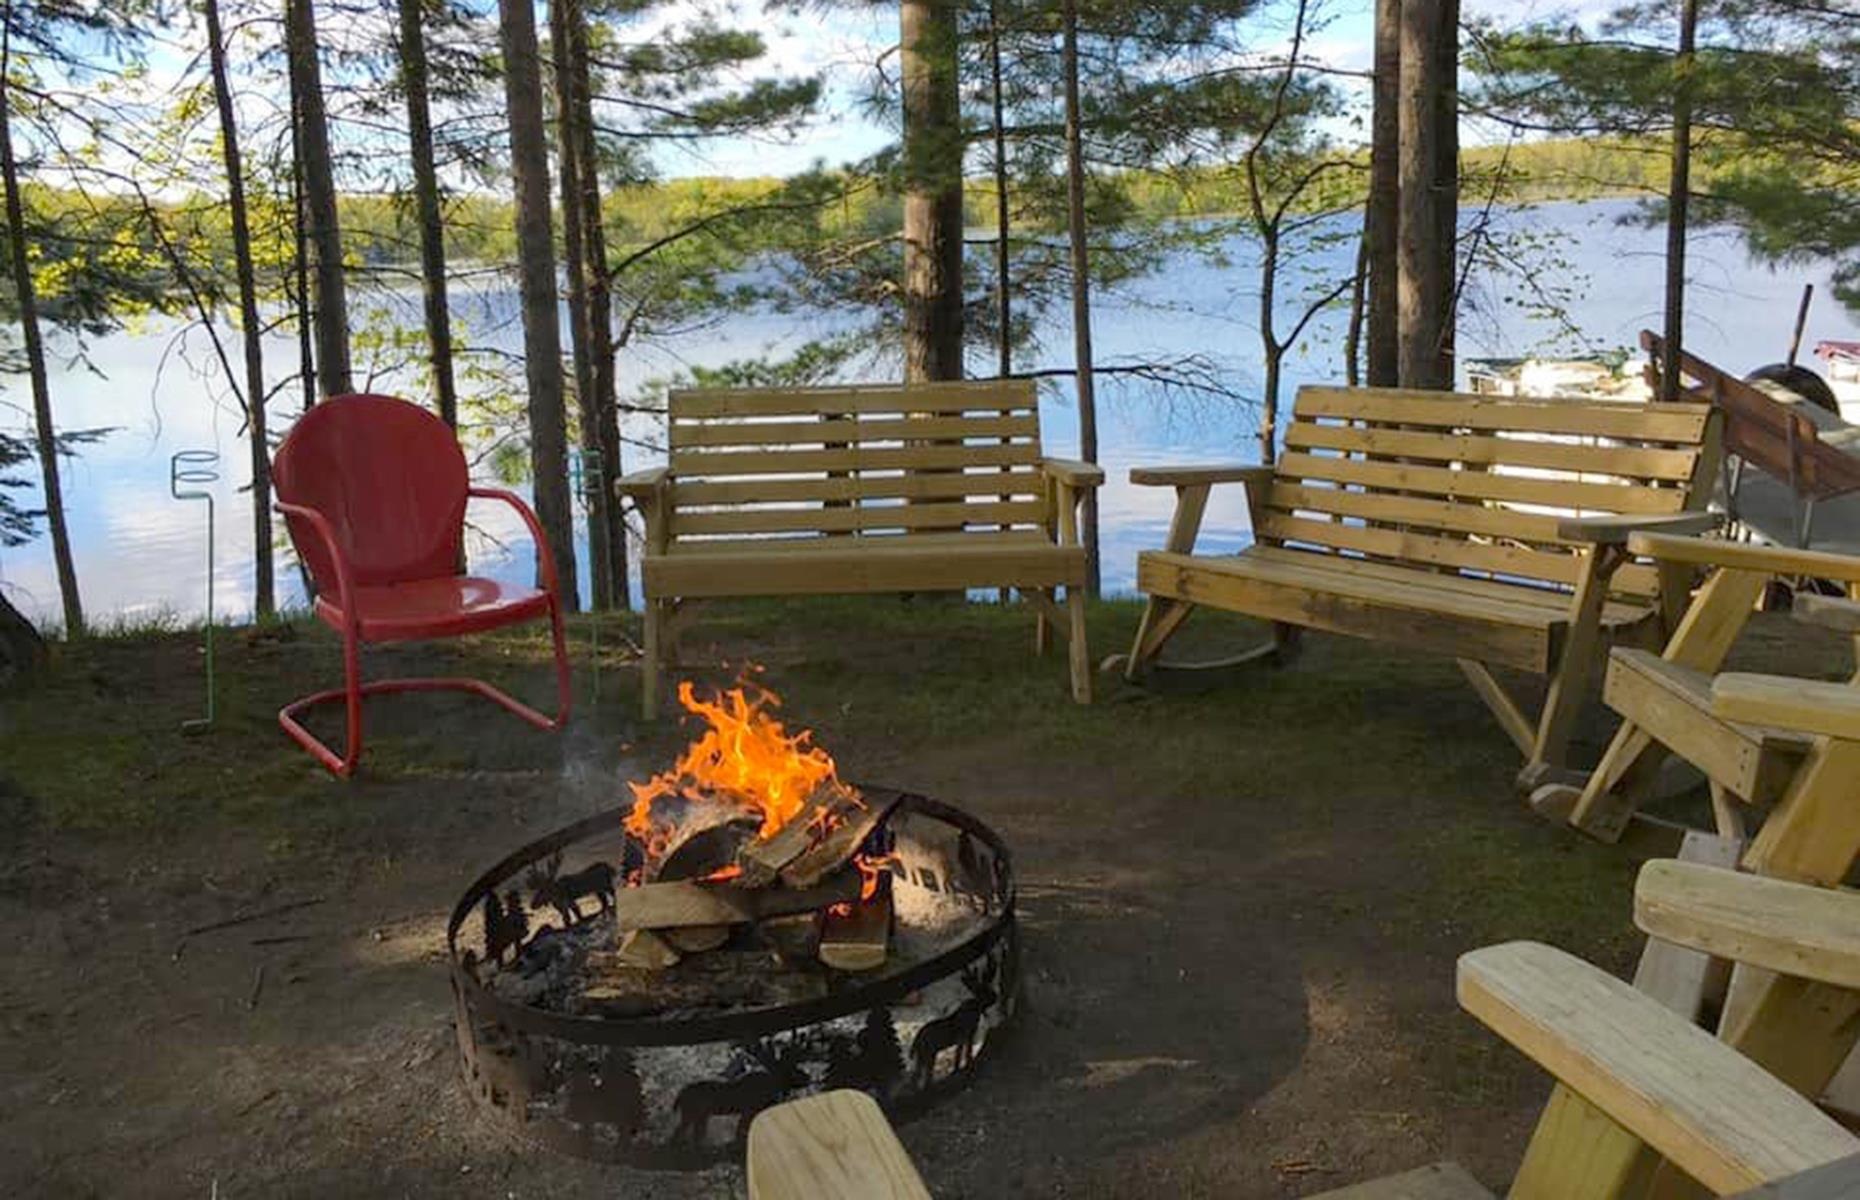 <p>Folded away in central Minnesota, this cheerful vacation resort is perfectly primed for a family camping adventure. It's arranged around pretty Turtle Lake with some 40 camping spots, of which six have pride of place right by the water. There's also a cabin and several vacation homes if you're not geared up for tent camping.</p>